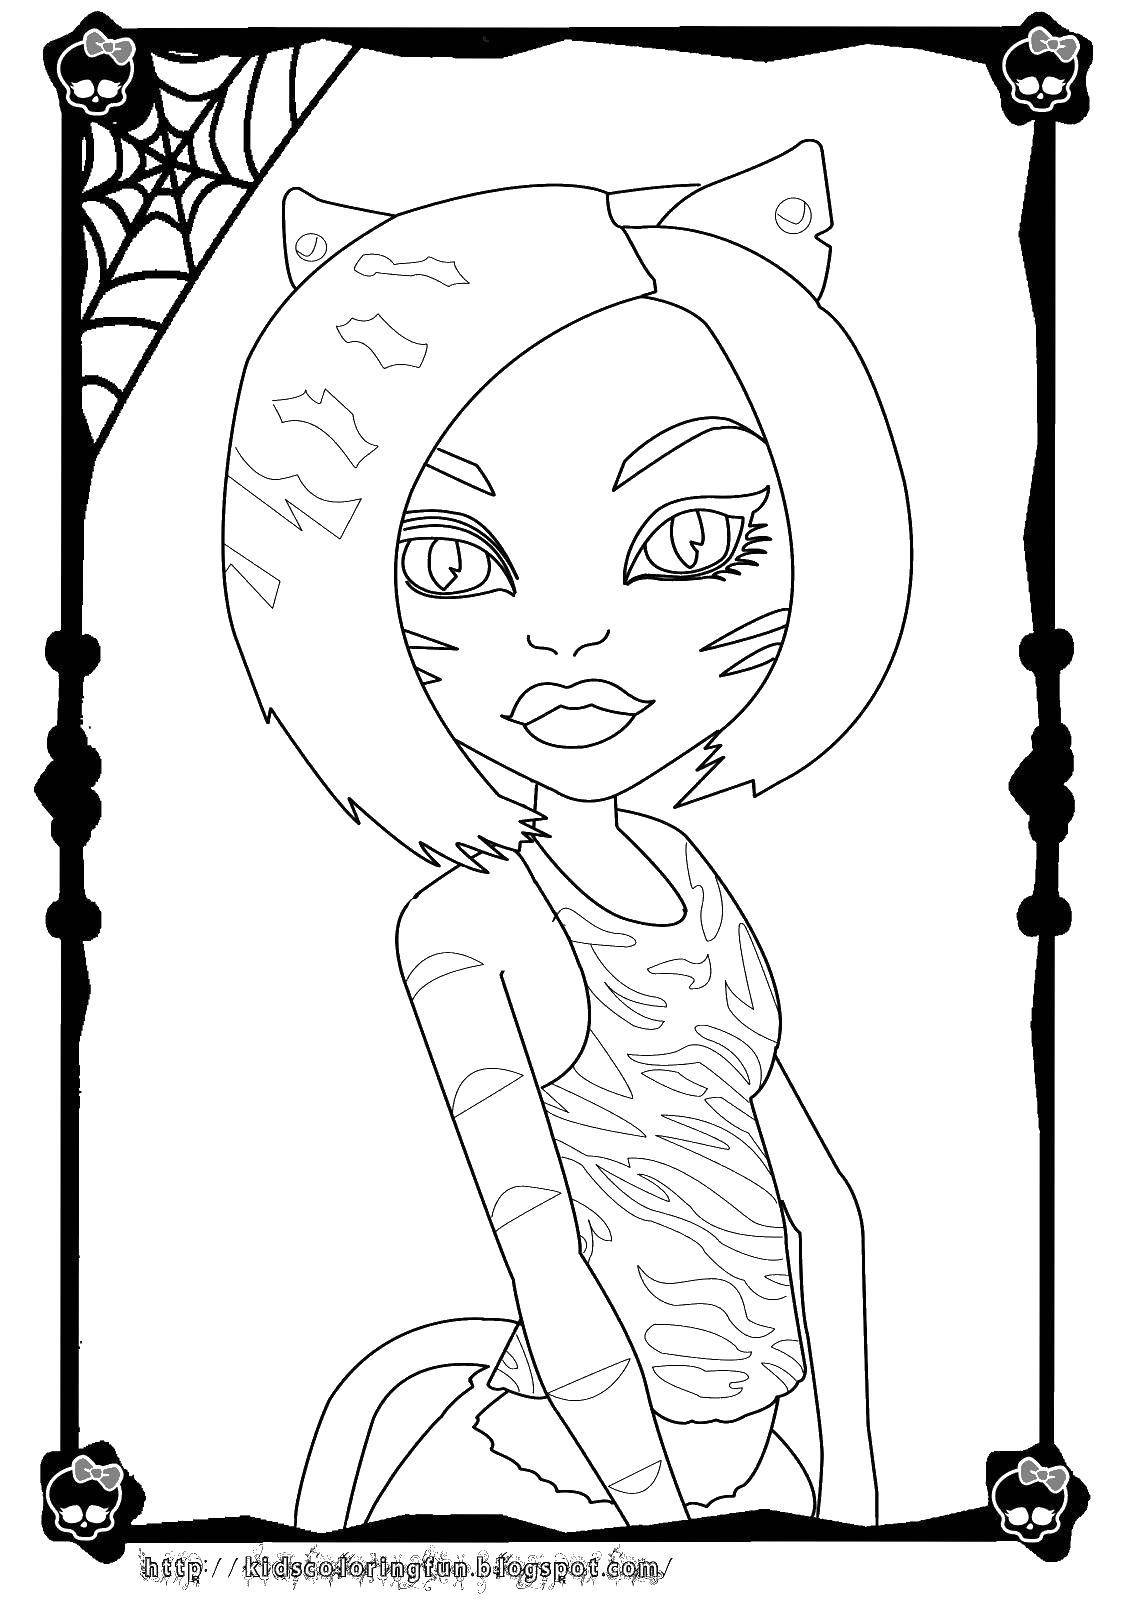 Coloring Monster high doll in the style of cats. Category Monster high. Tags:  Monster high, doll, cartoon, cat.